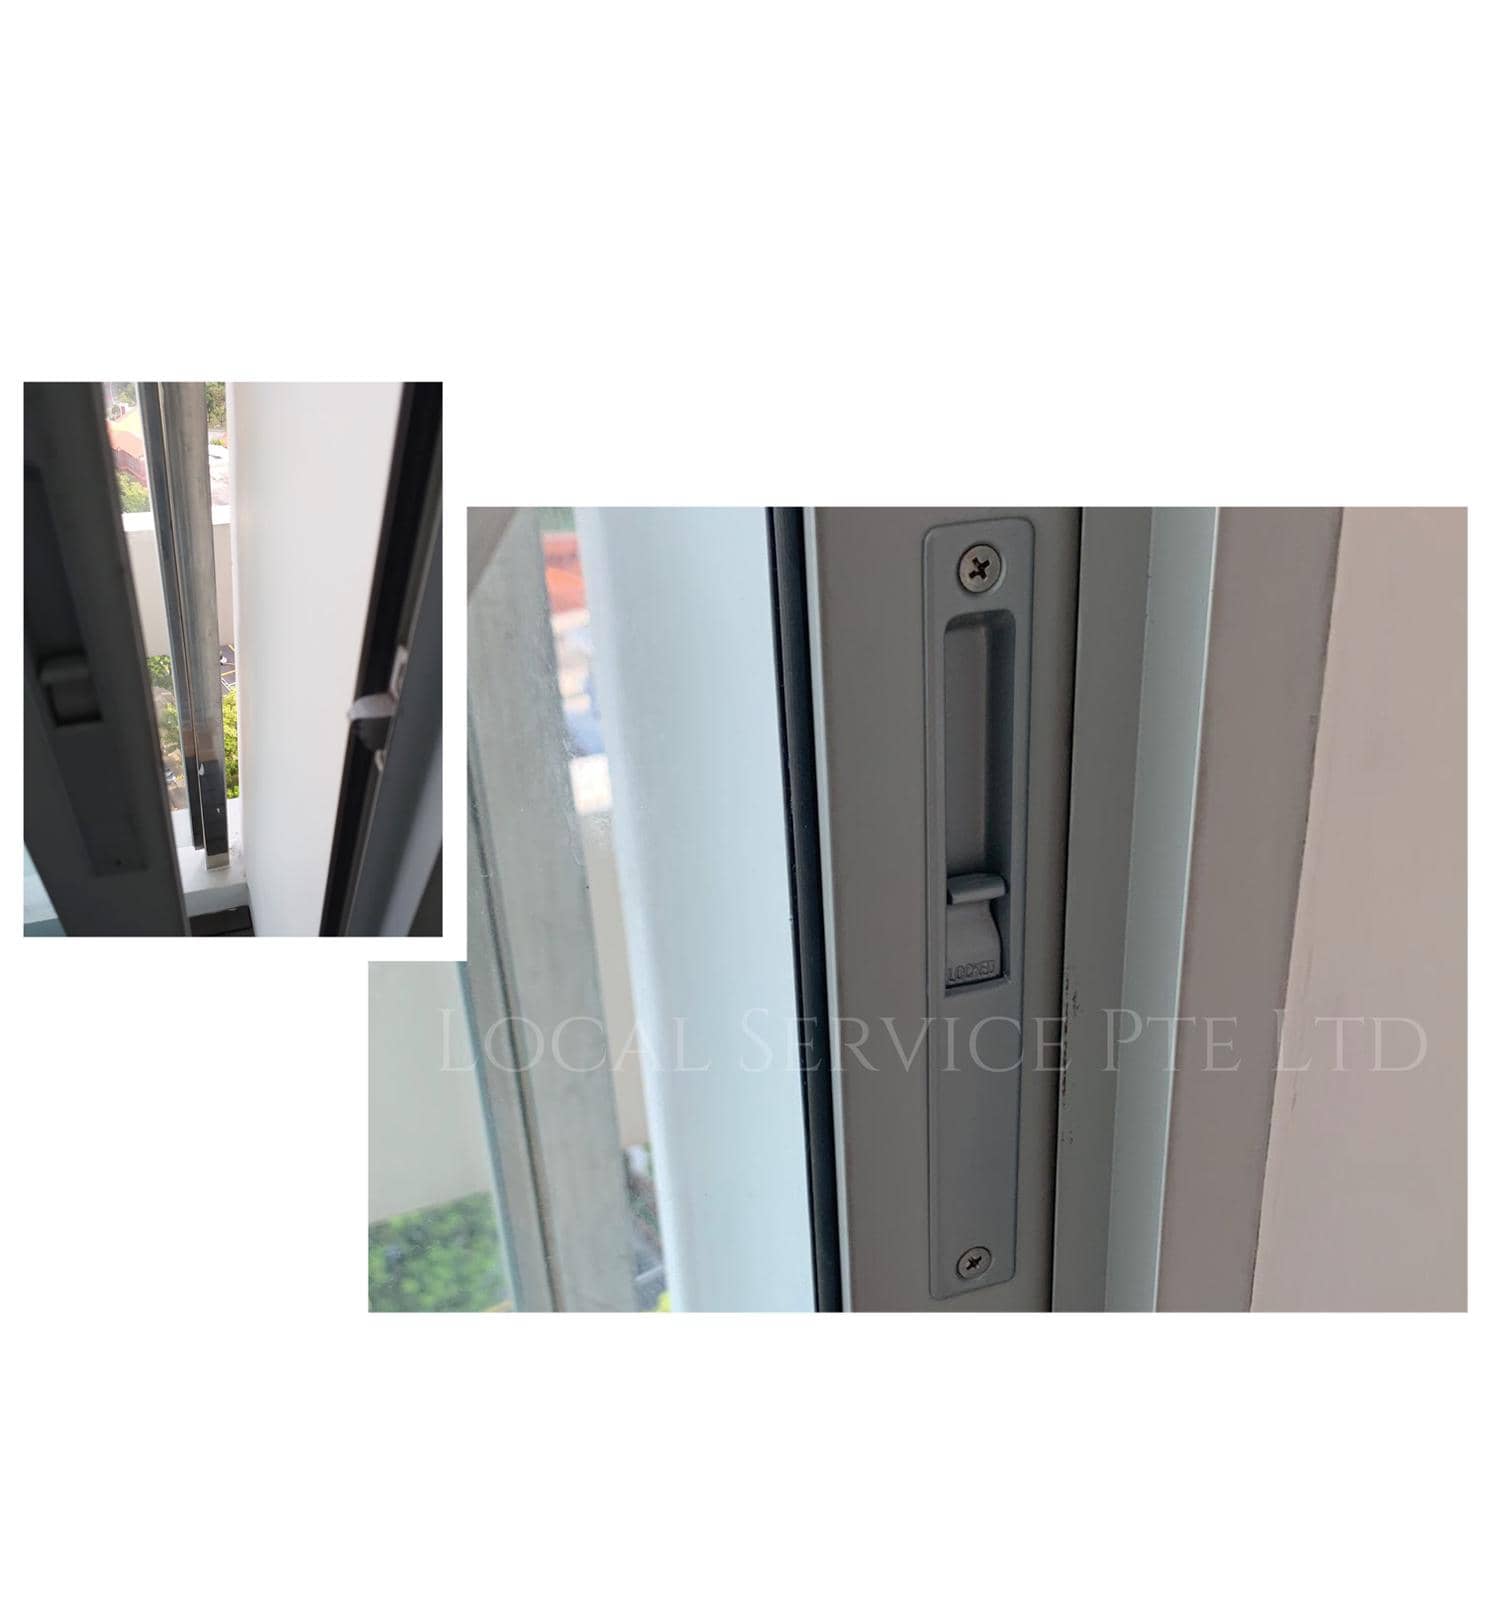 Supply And Replace Sliding Glass Door Lock